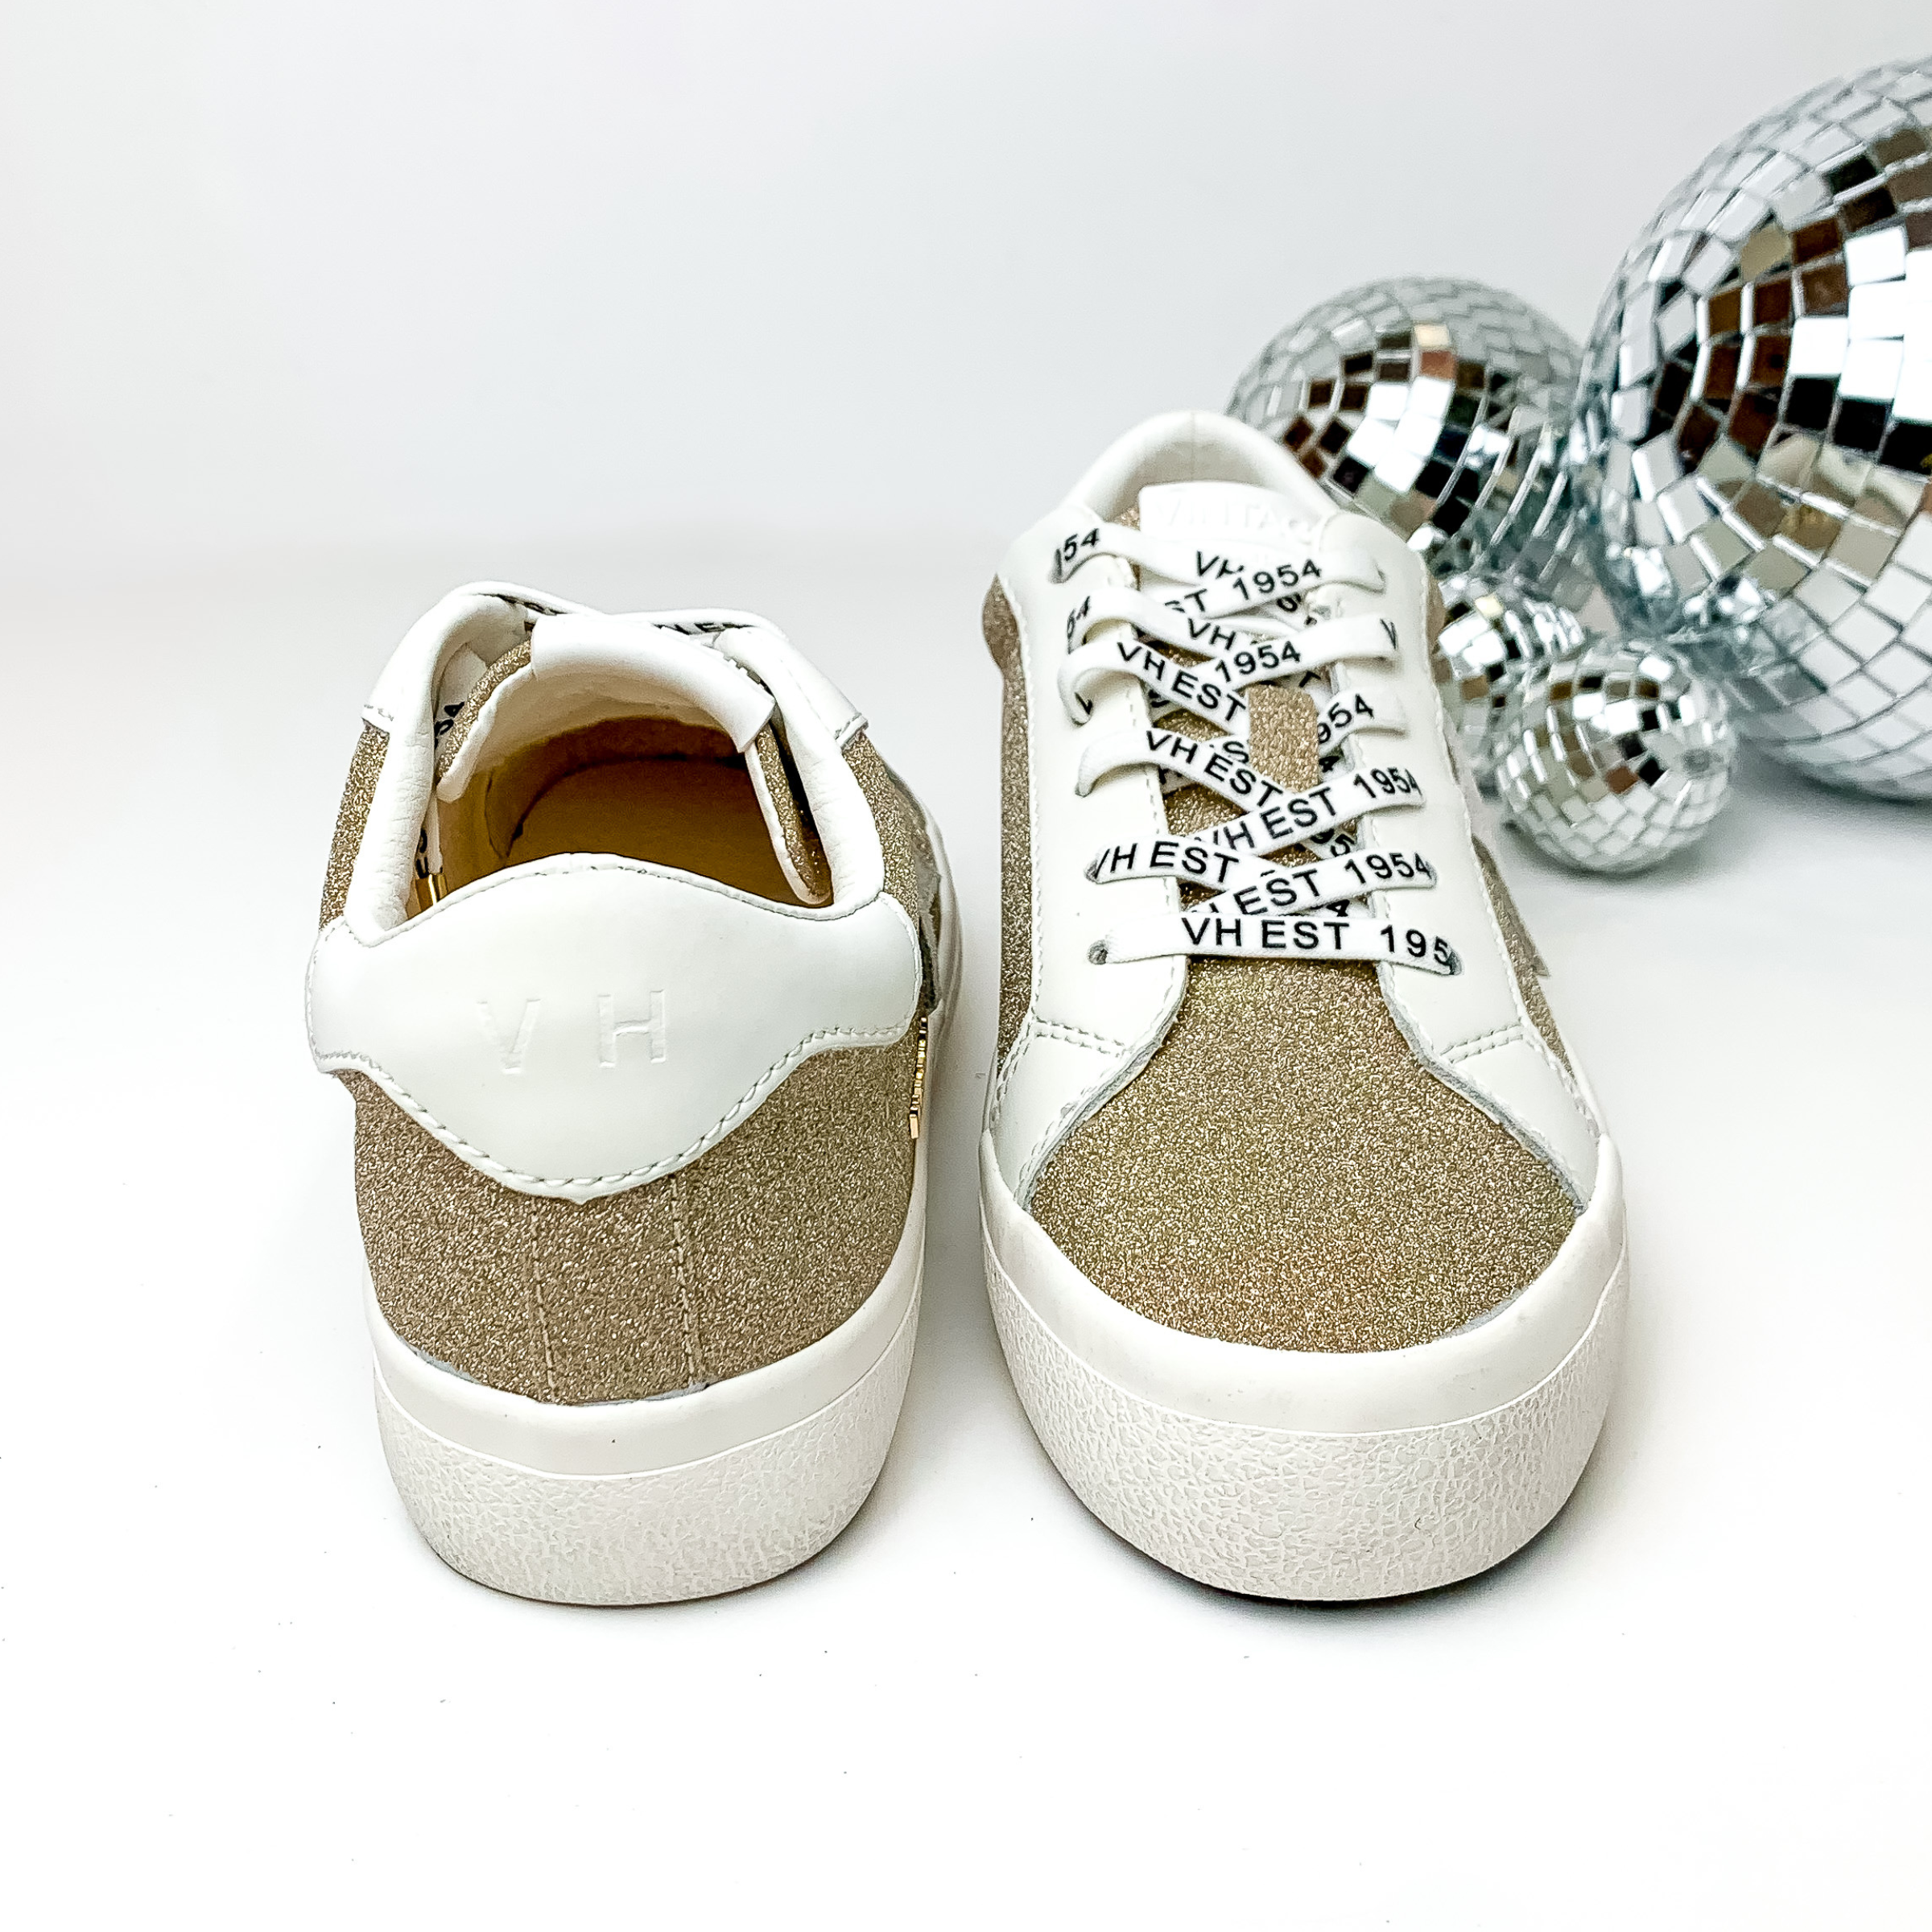 Vintage Havana | Vera Glitter Sneakers in Light Gold - Giddy Up Glamour Boutique